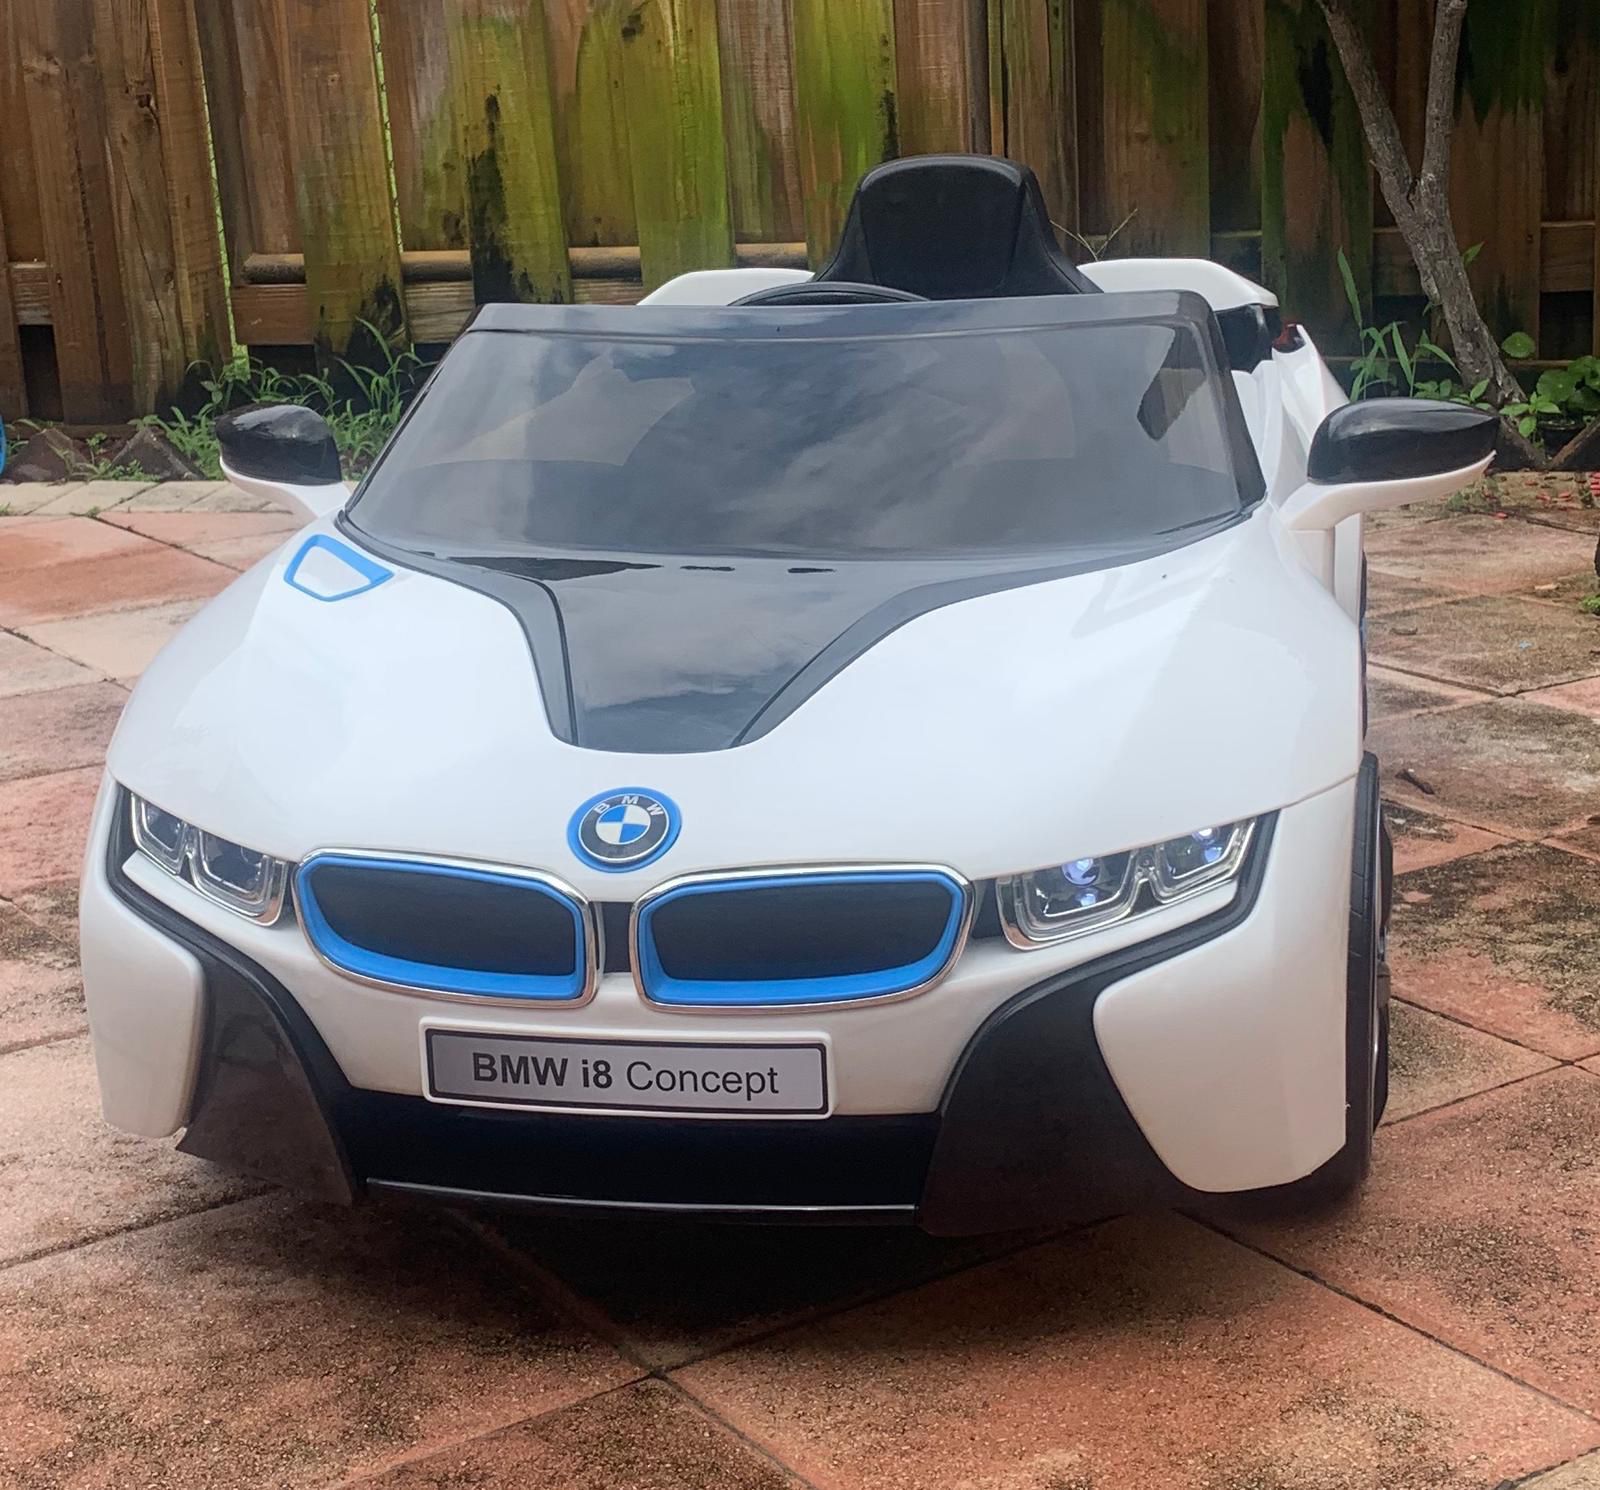 Power wheels, ride on toys, toy car, baby car, toddlers Electric kids car BMW i8 concept